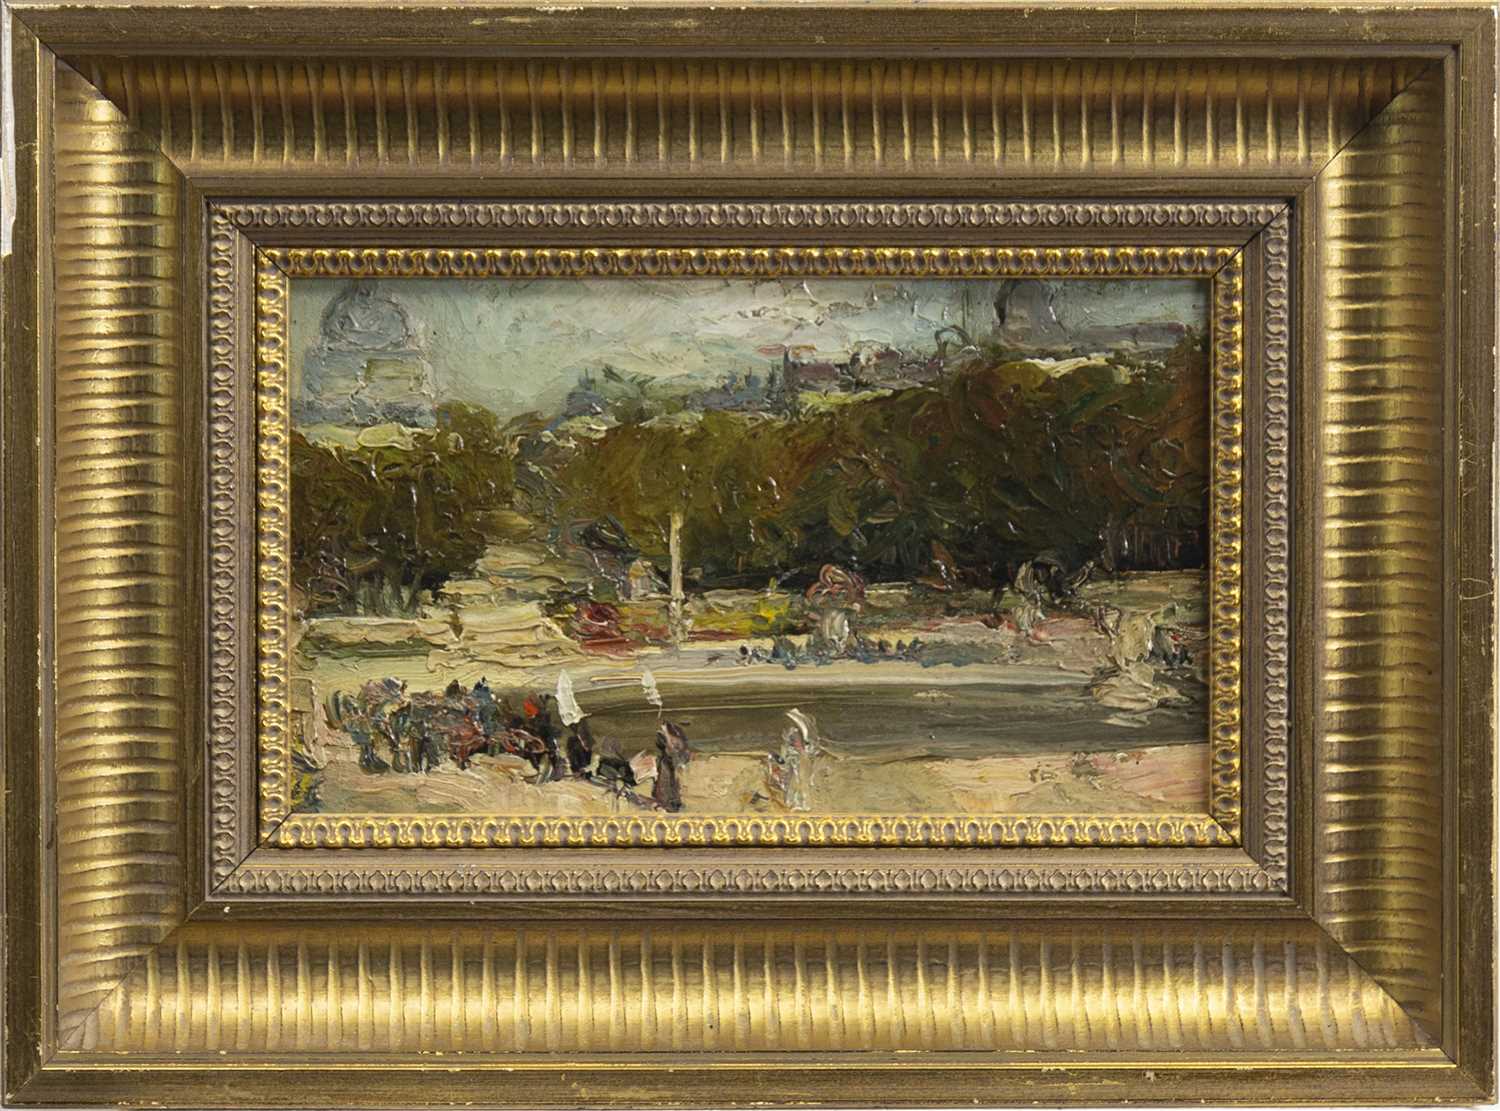 Lot 443 - FIGURES BY A POND, AN OIL BY ALEXANDER JAMIESON